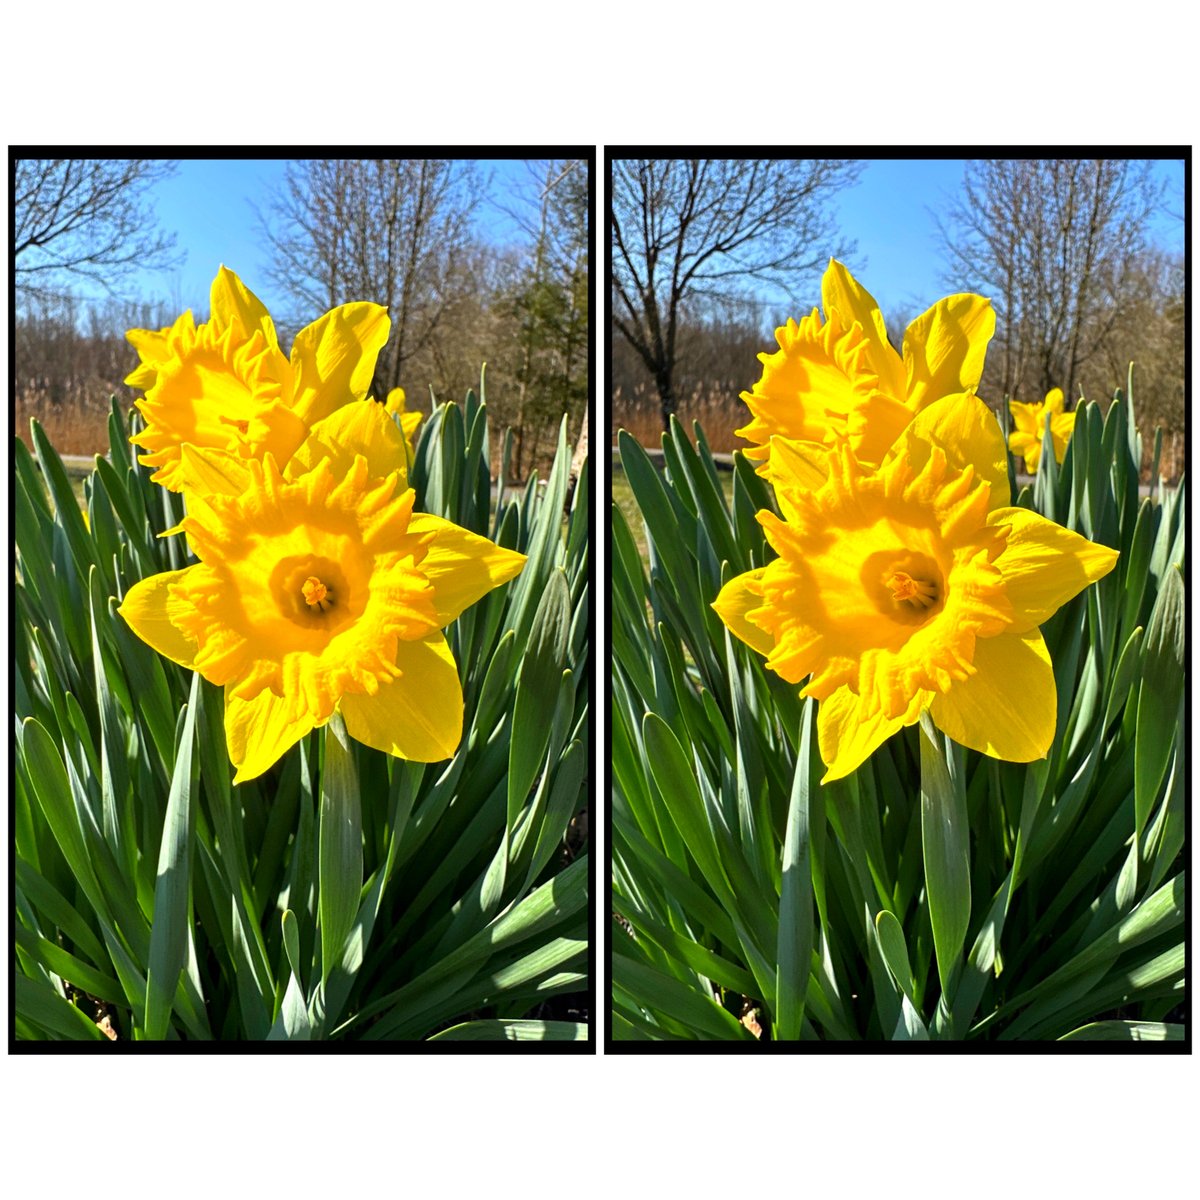 Now this is Spring! Thank you Tracy Seeger of New Jersey, USA ! Keep them coming #SpringInStereo tag @londonstereo and / or email to nicole@londonstereo.com